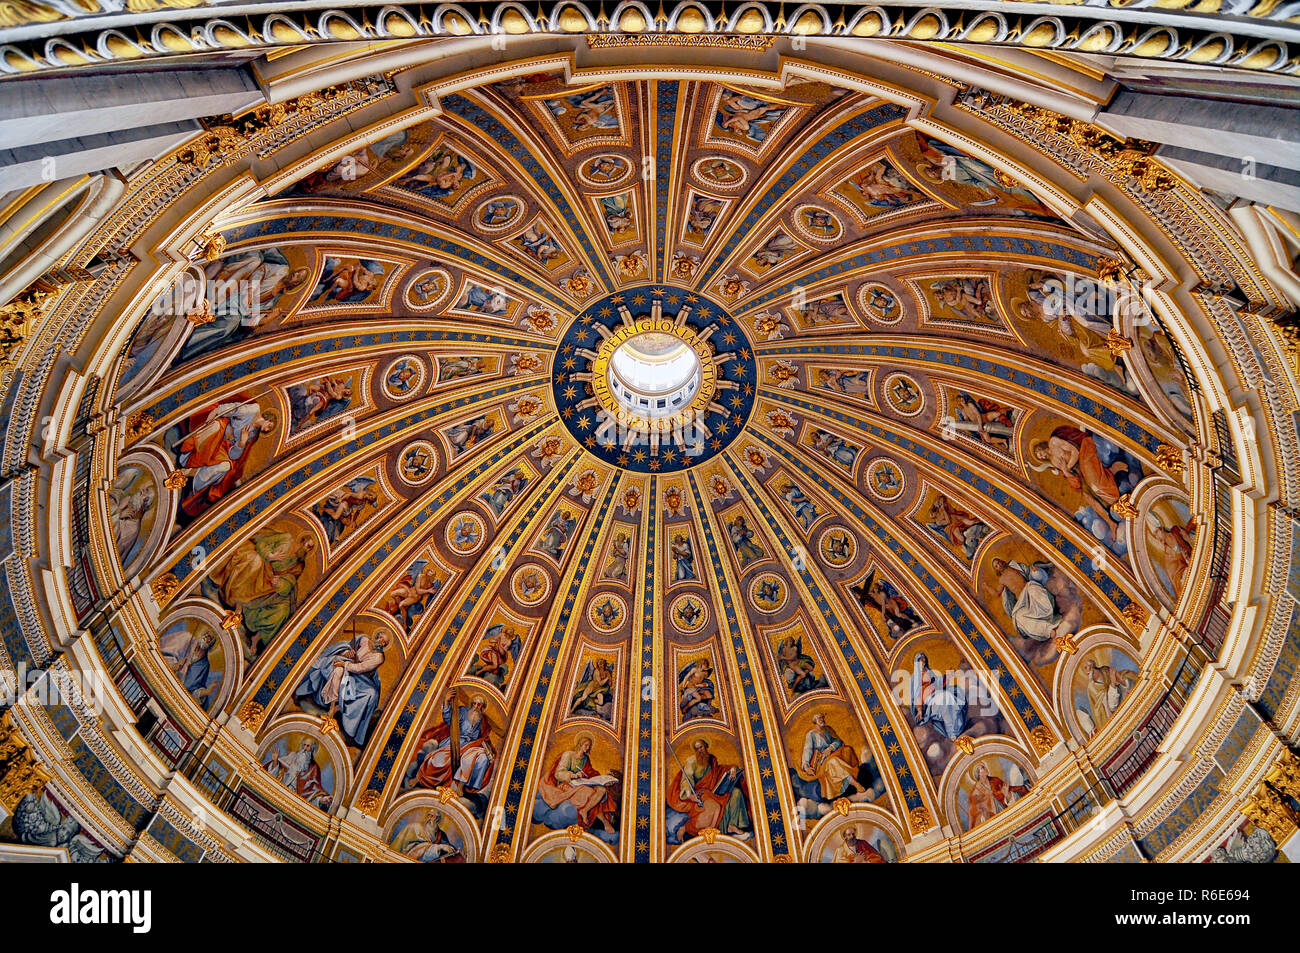 Interior Side Of The Dome Of Saint Peter'S Basilica, Vatican City, Italy Stock Photo